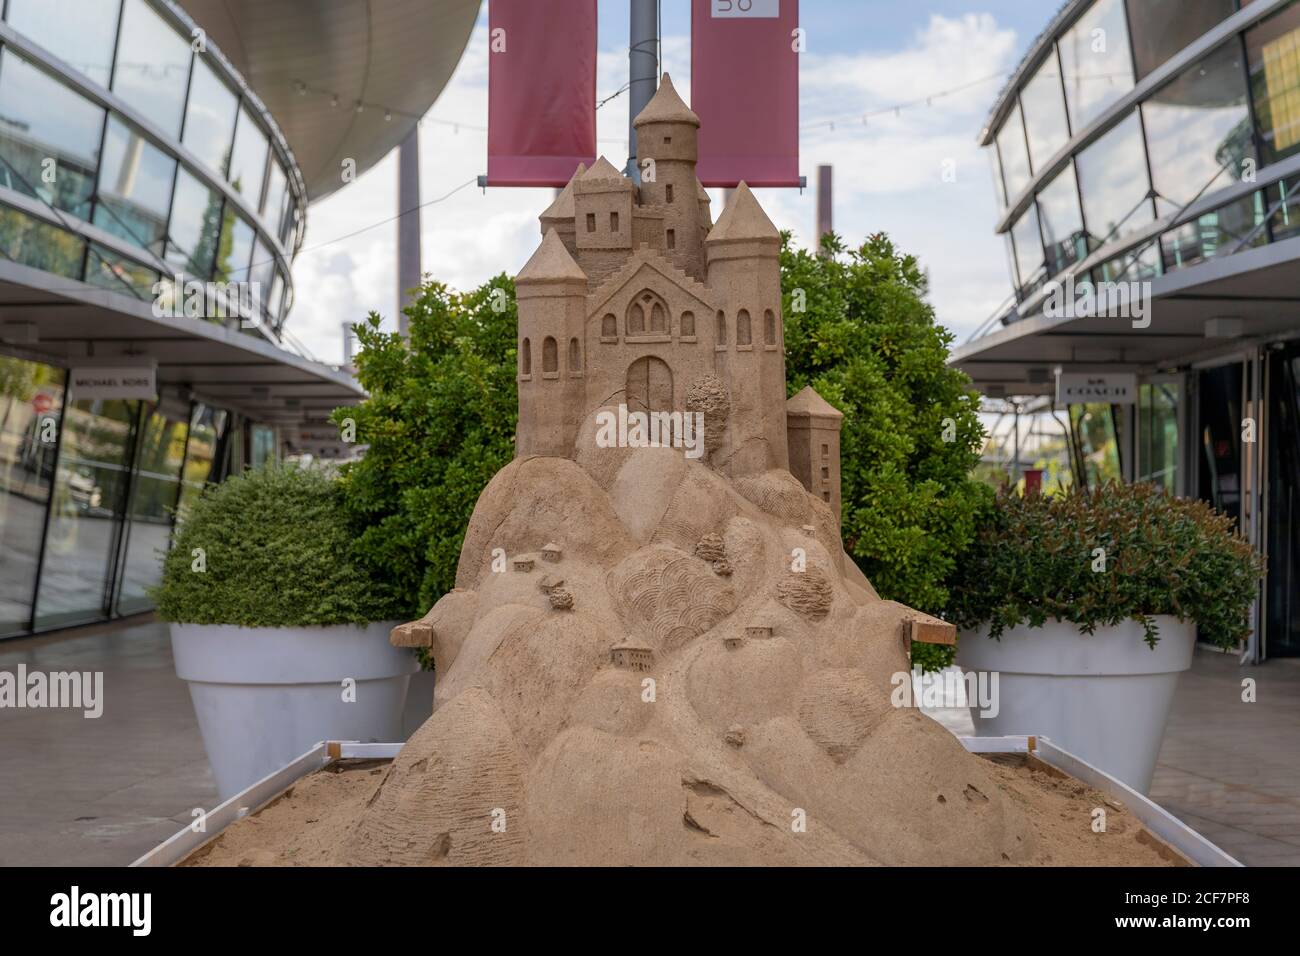 Designer Outlets in Wolfsburg is been decorated with sand castles to celebrate the ending of summer 2020. Stock Photo